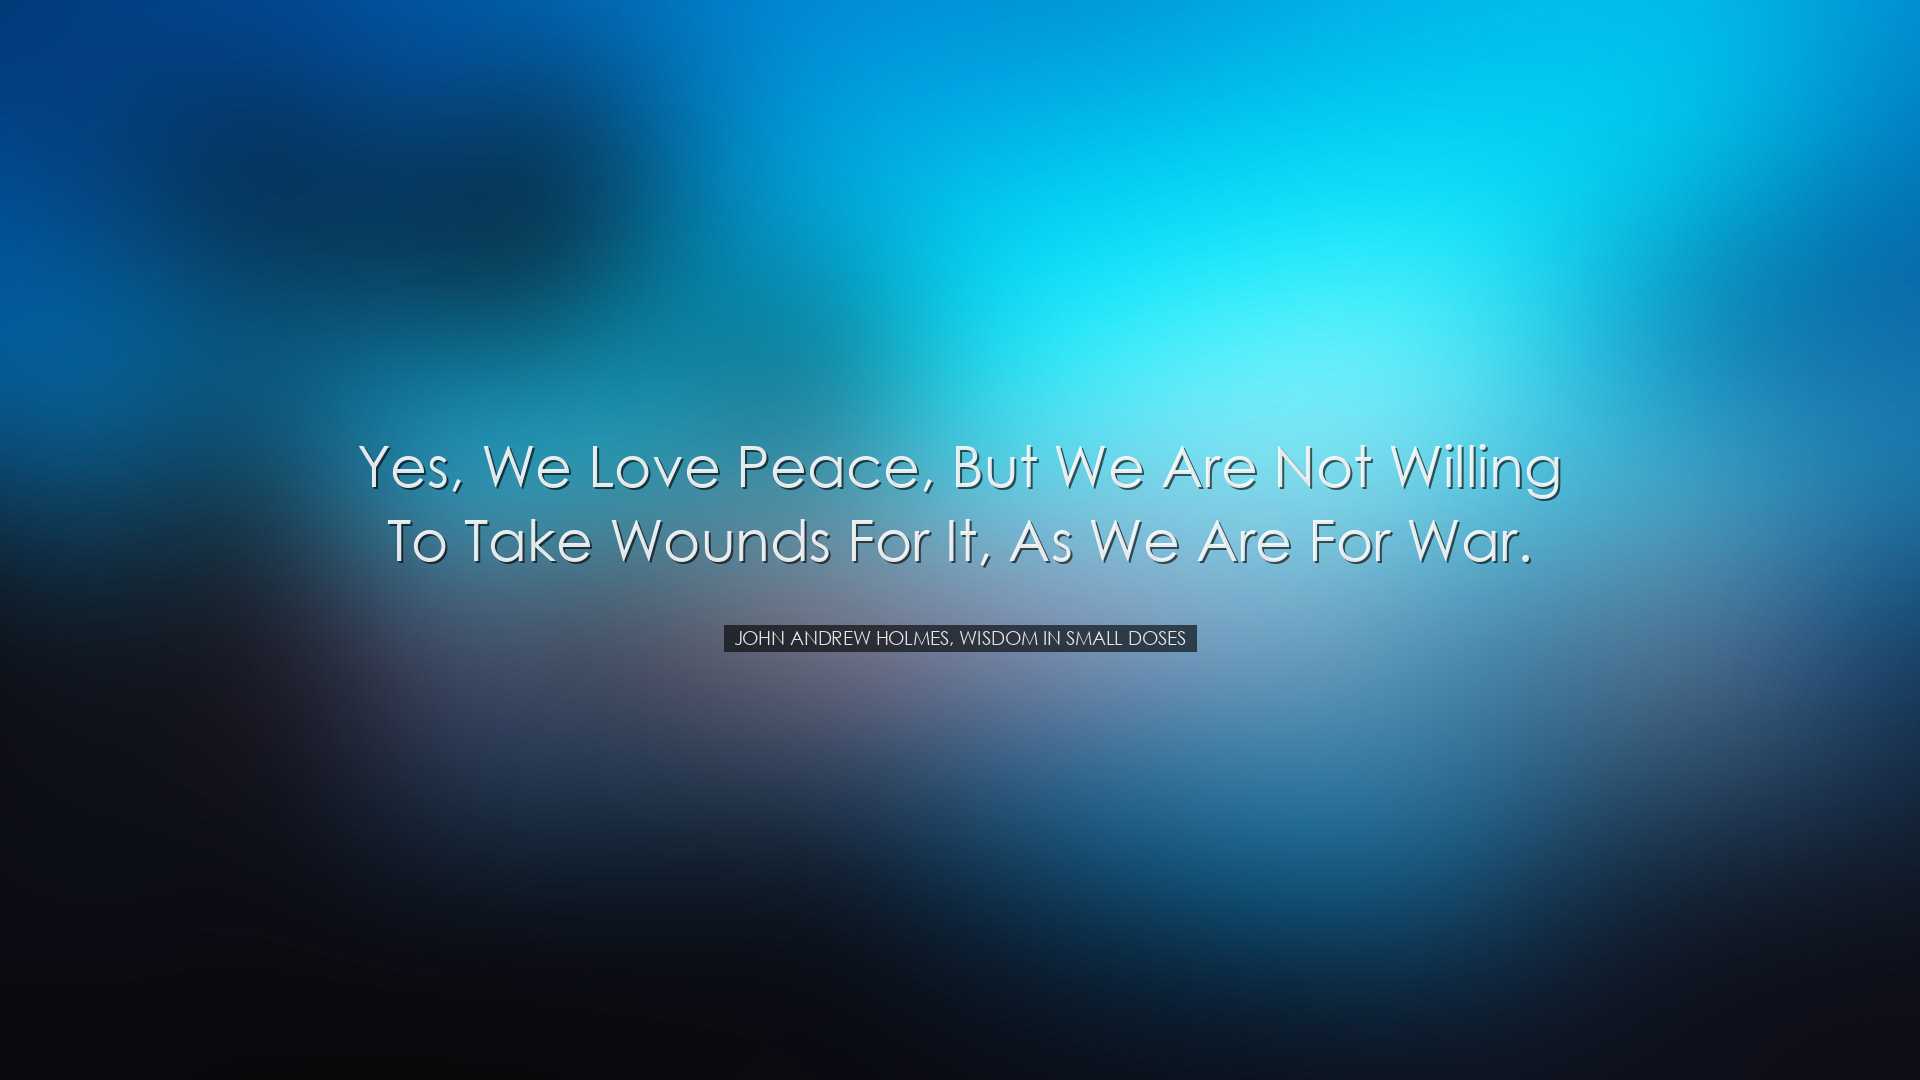 Yes, we love peace, but we are not willing to take wounds for it,